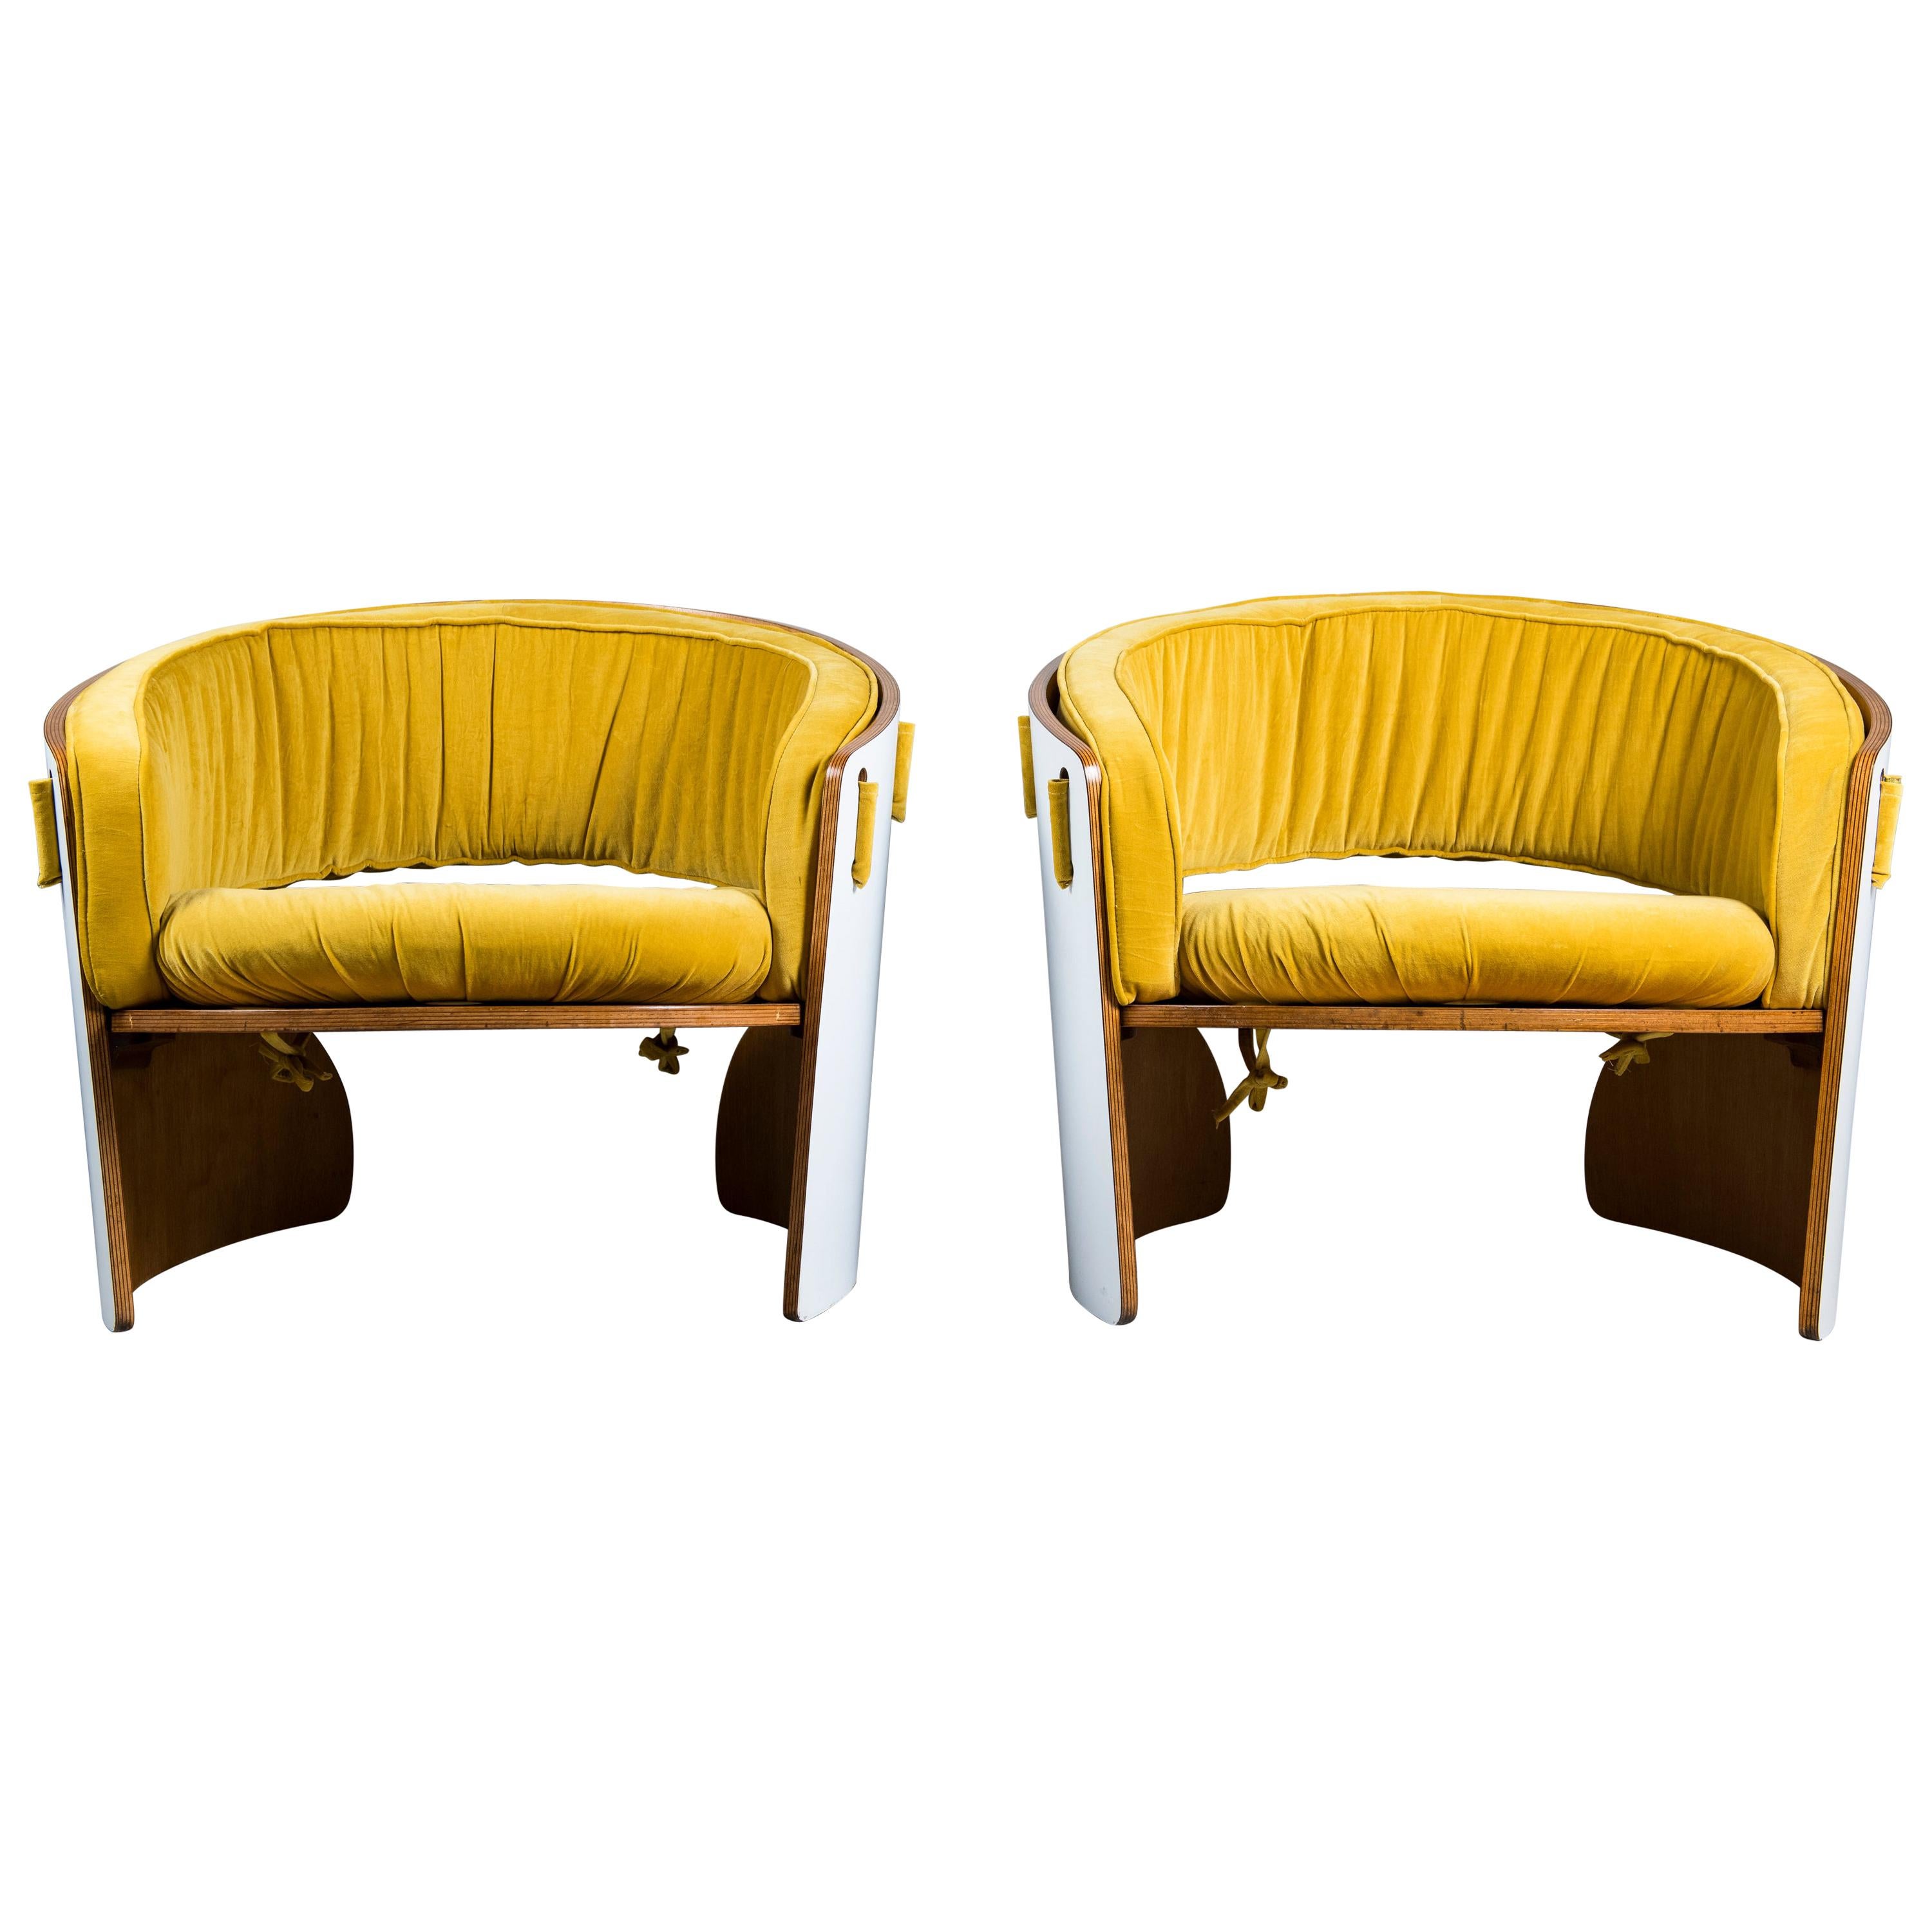 Pair of Wood, Formica and Velvet Armchairs, Designed by Ricardo Blanco, 1969